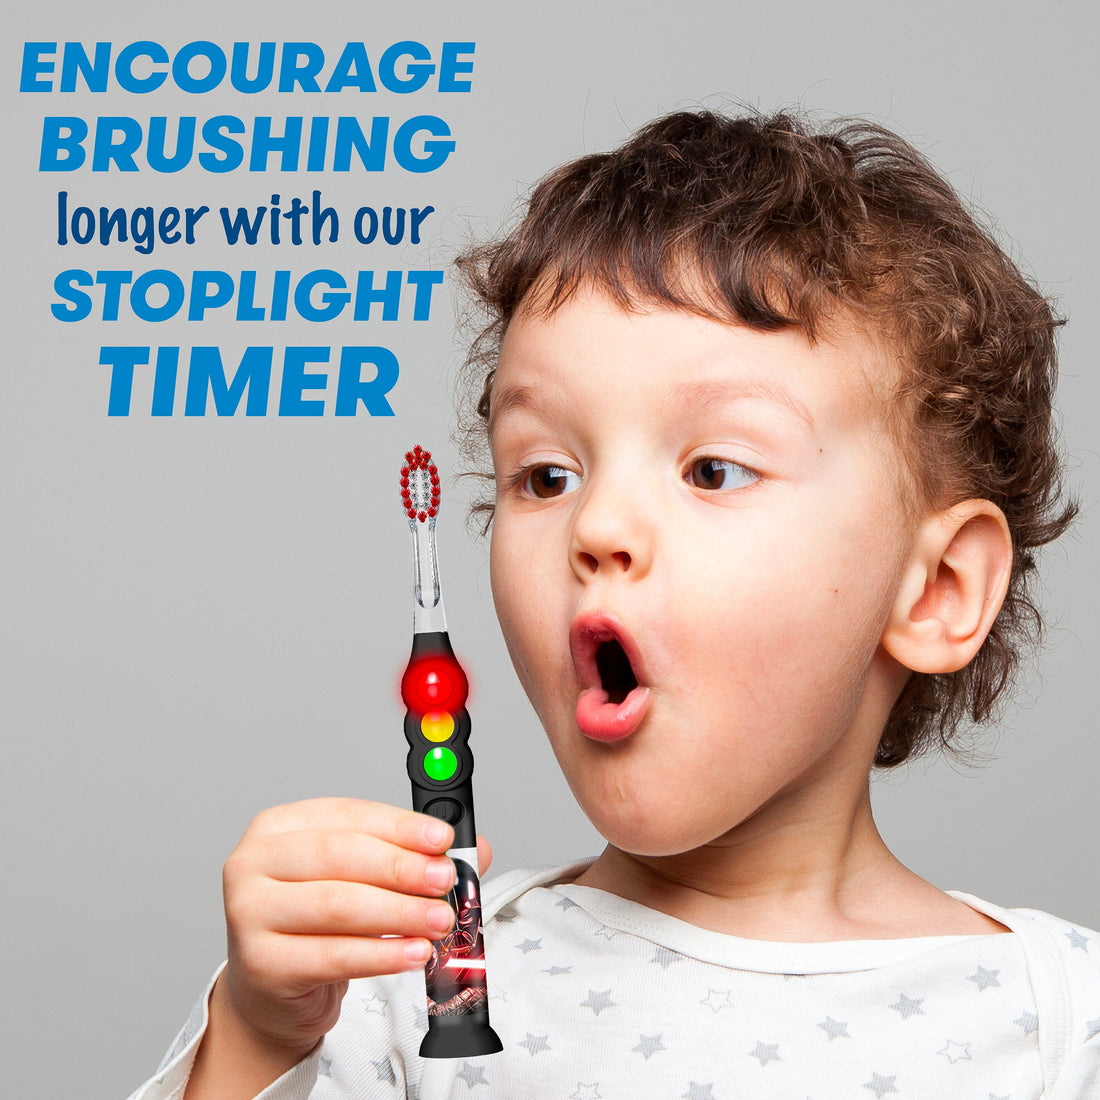 Child holding Star Wars Darth Vader Ready Go light up timer toothbrush. Encourage brushing longer with our stoplight timer